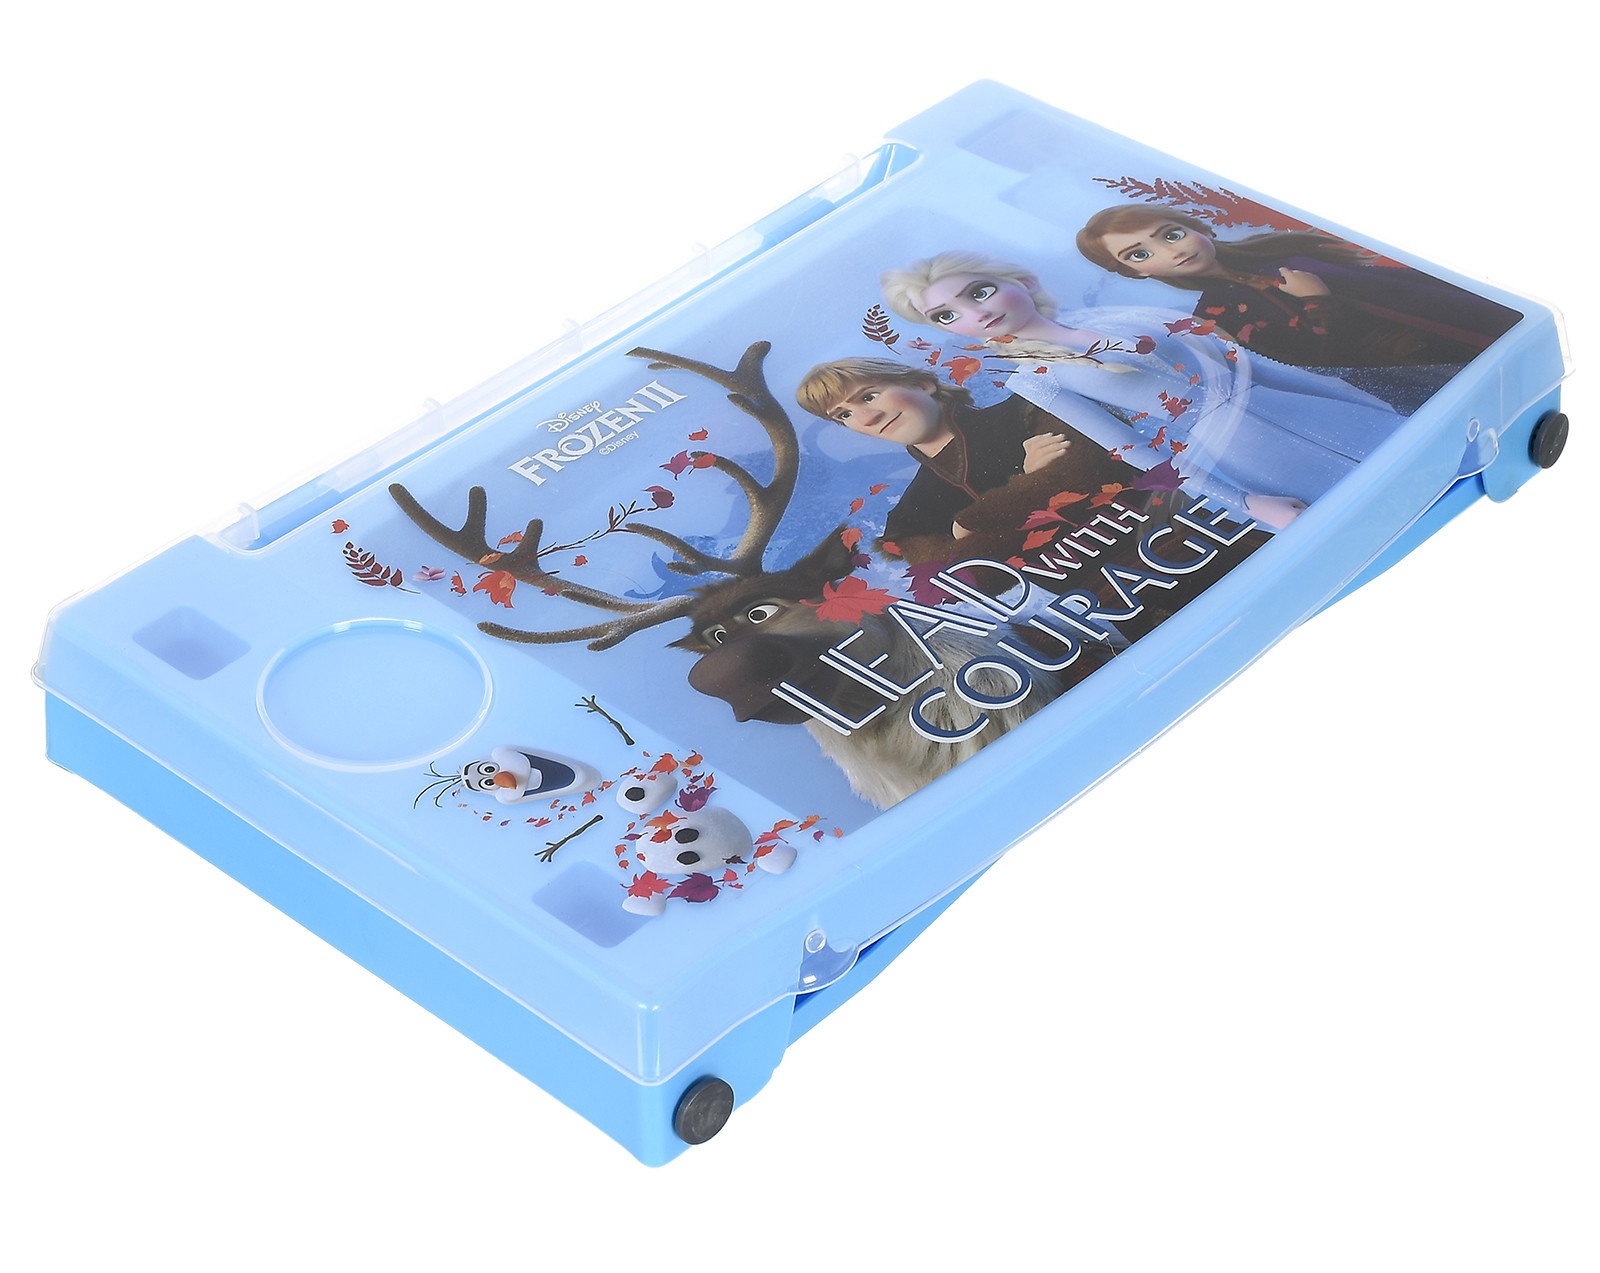 Kuber Industries Multiuses Disney Frozen Print Plastic Study Desk/Laptop Table With Camparment For Home & Office (Blue)